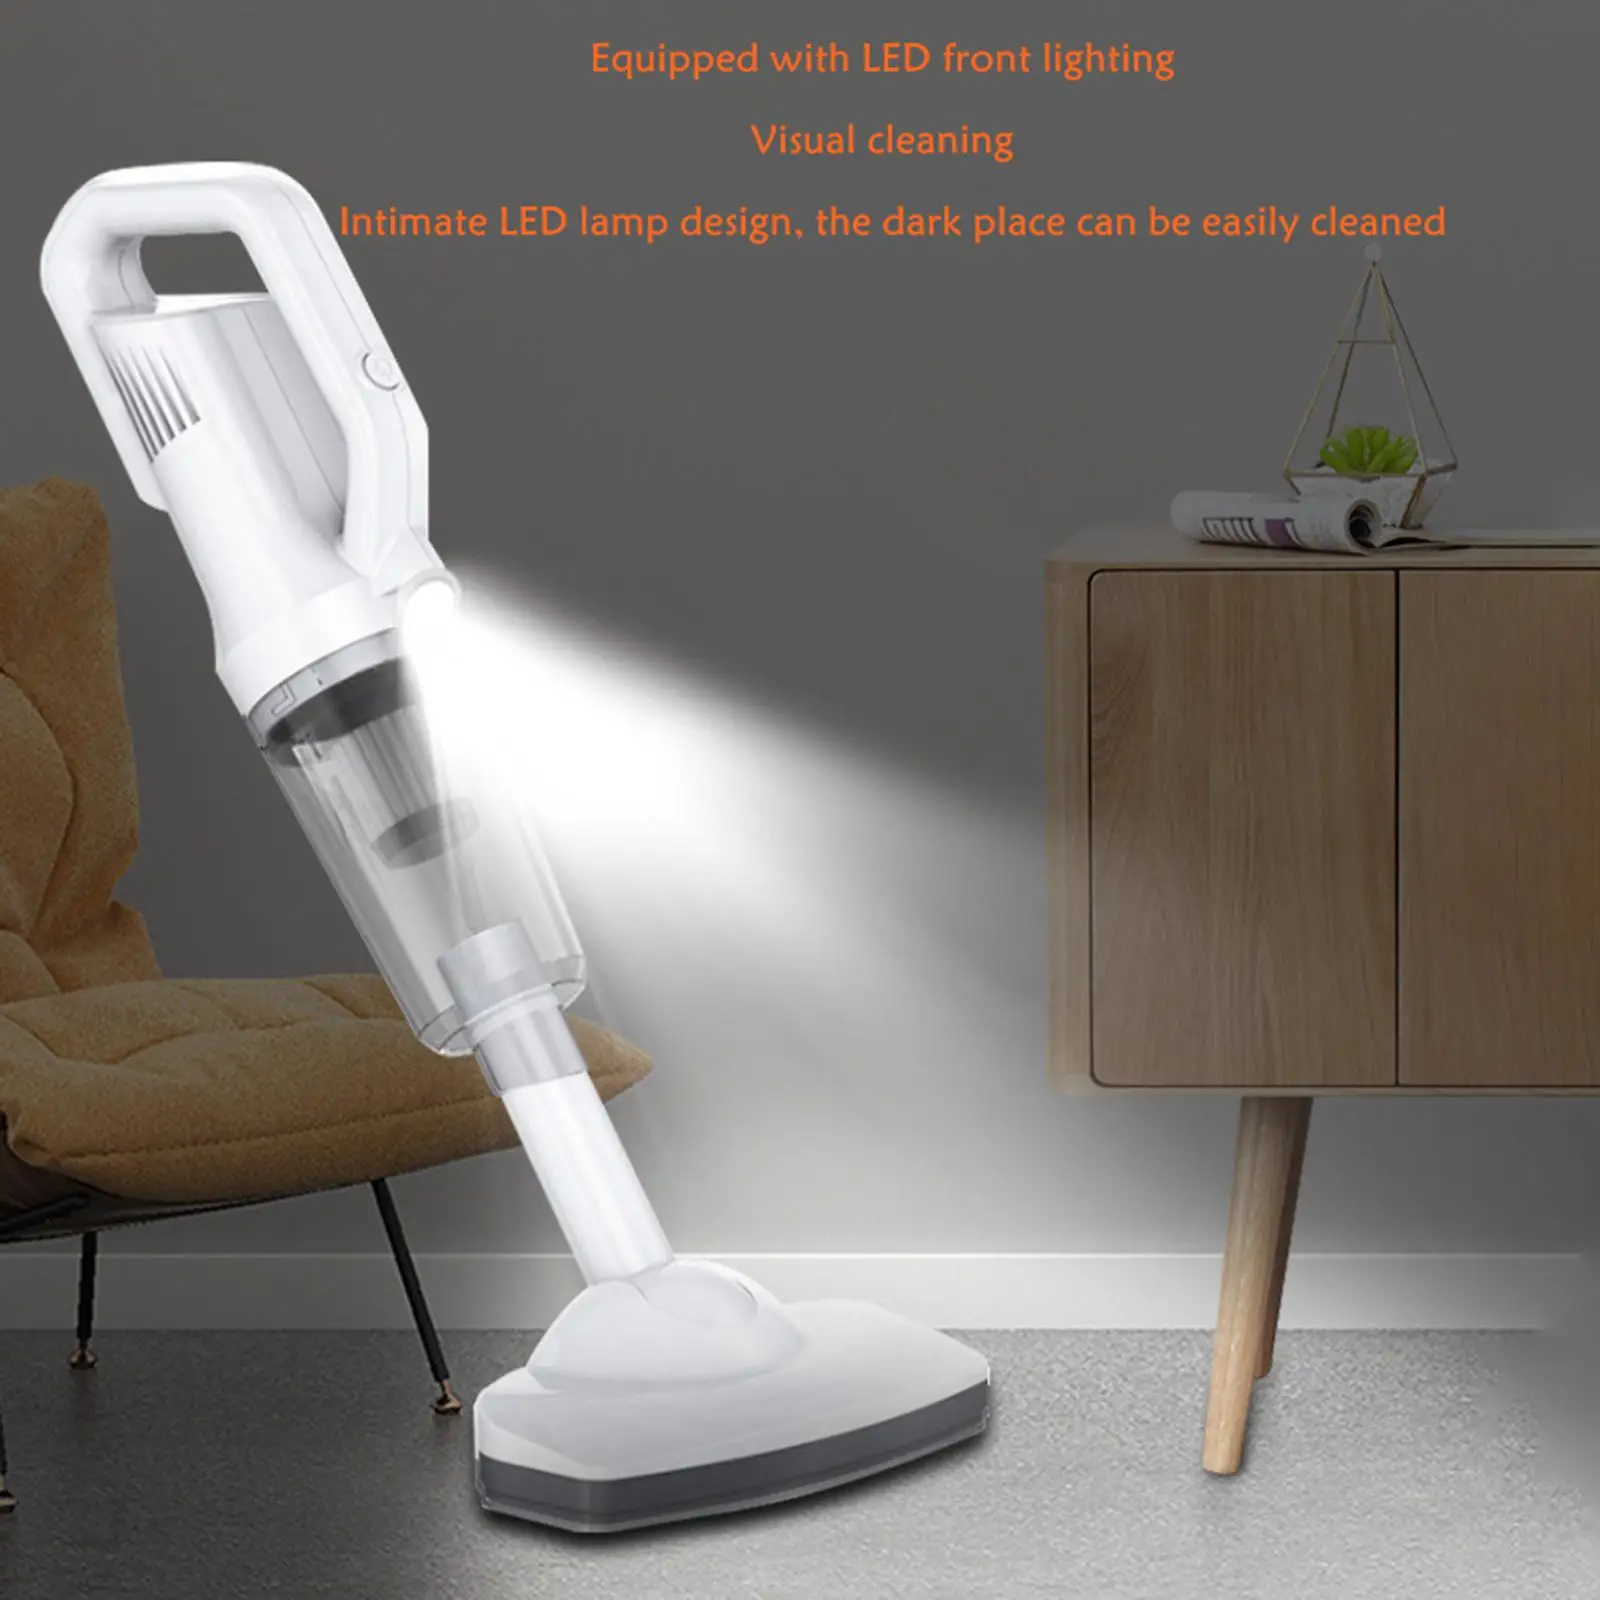 Handheld Vacuums Detachable Cleaning USB Rechargeable for